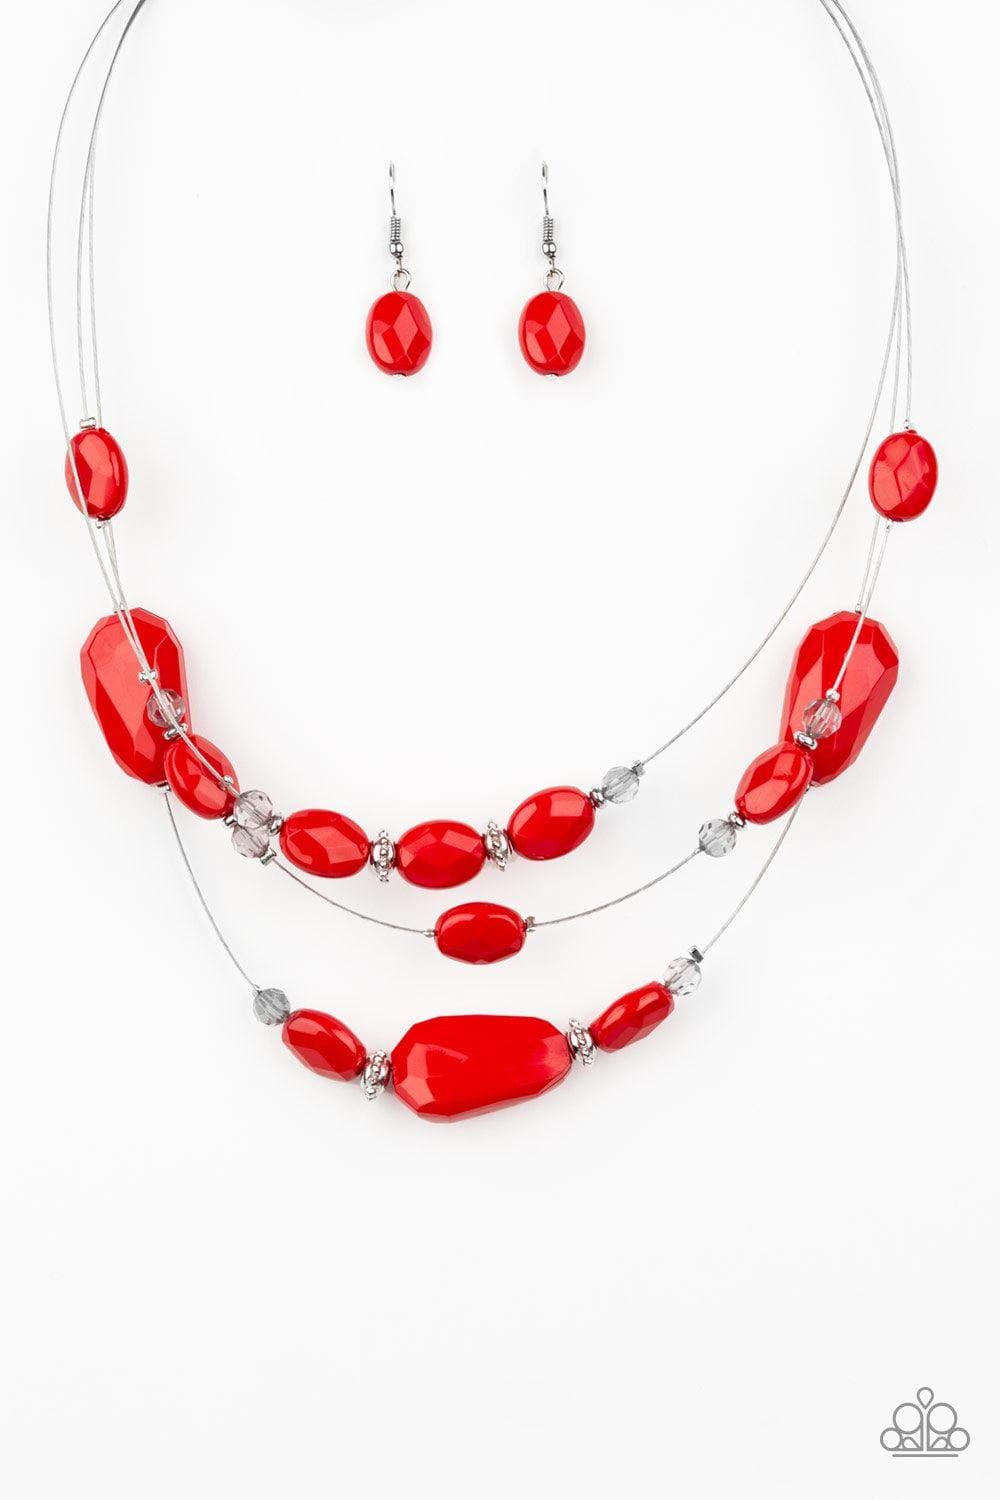 Paparazzi Accessories - Radiant Reflections - Red Necklace - Bling by JessieK